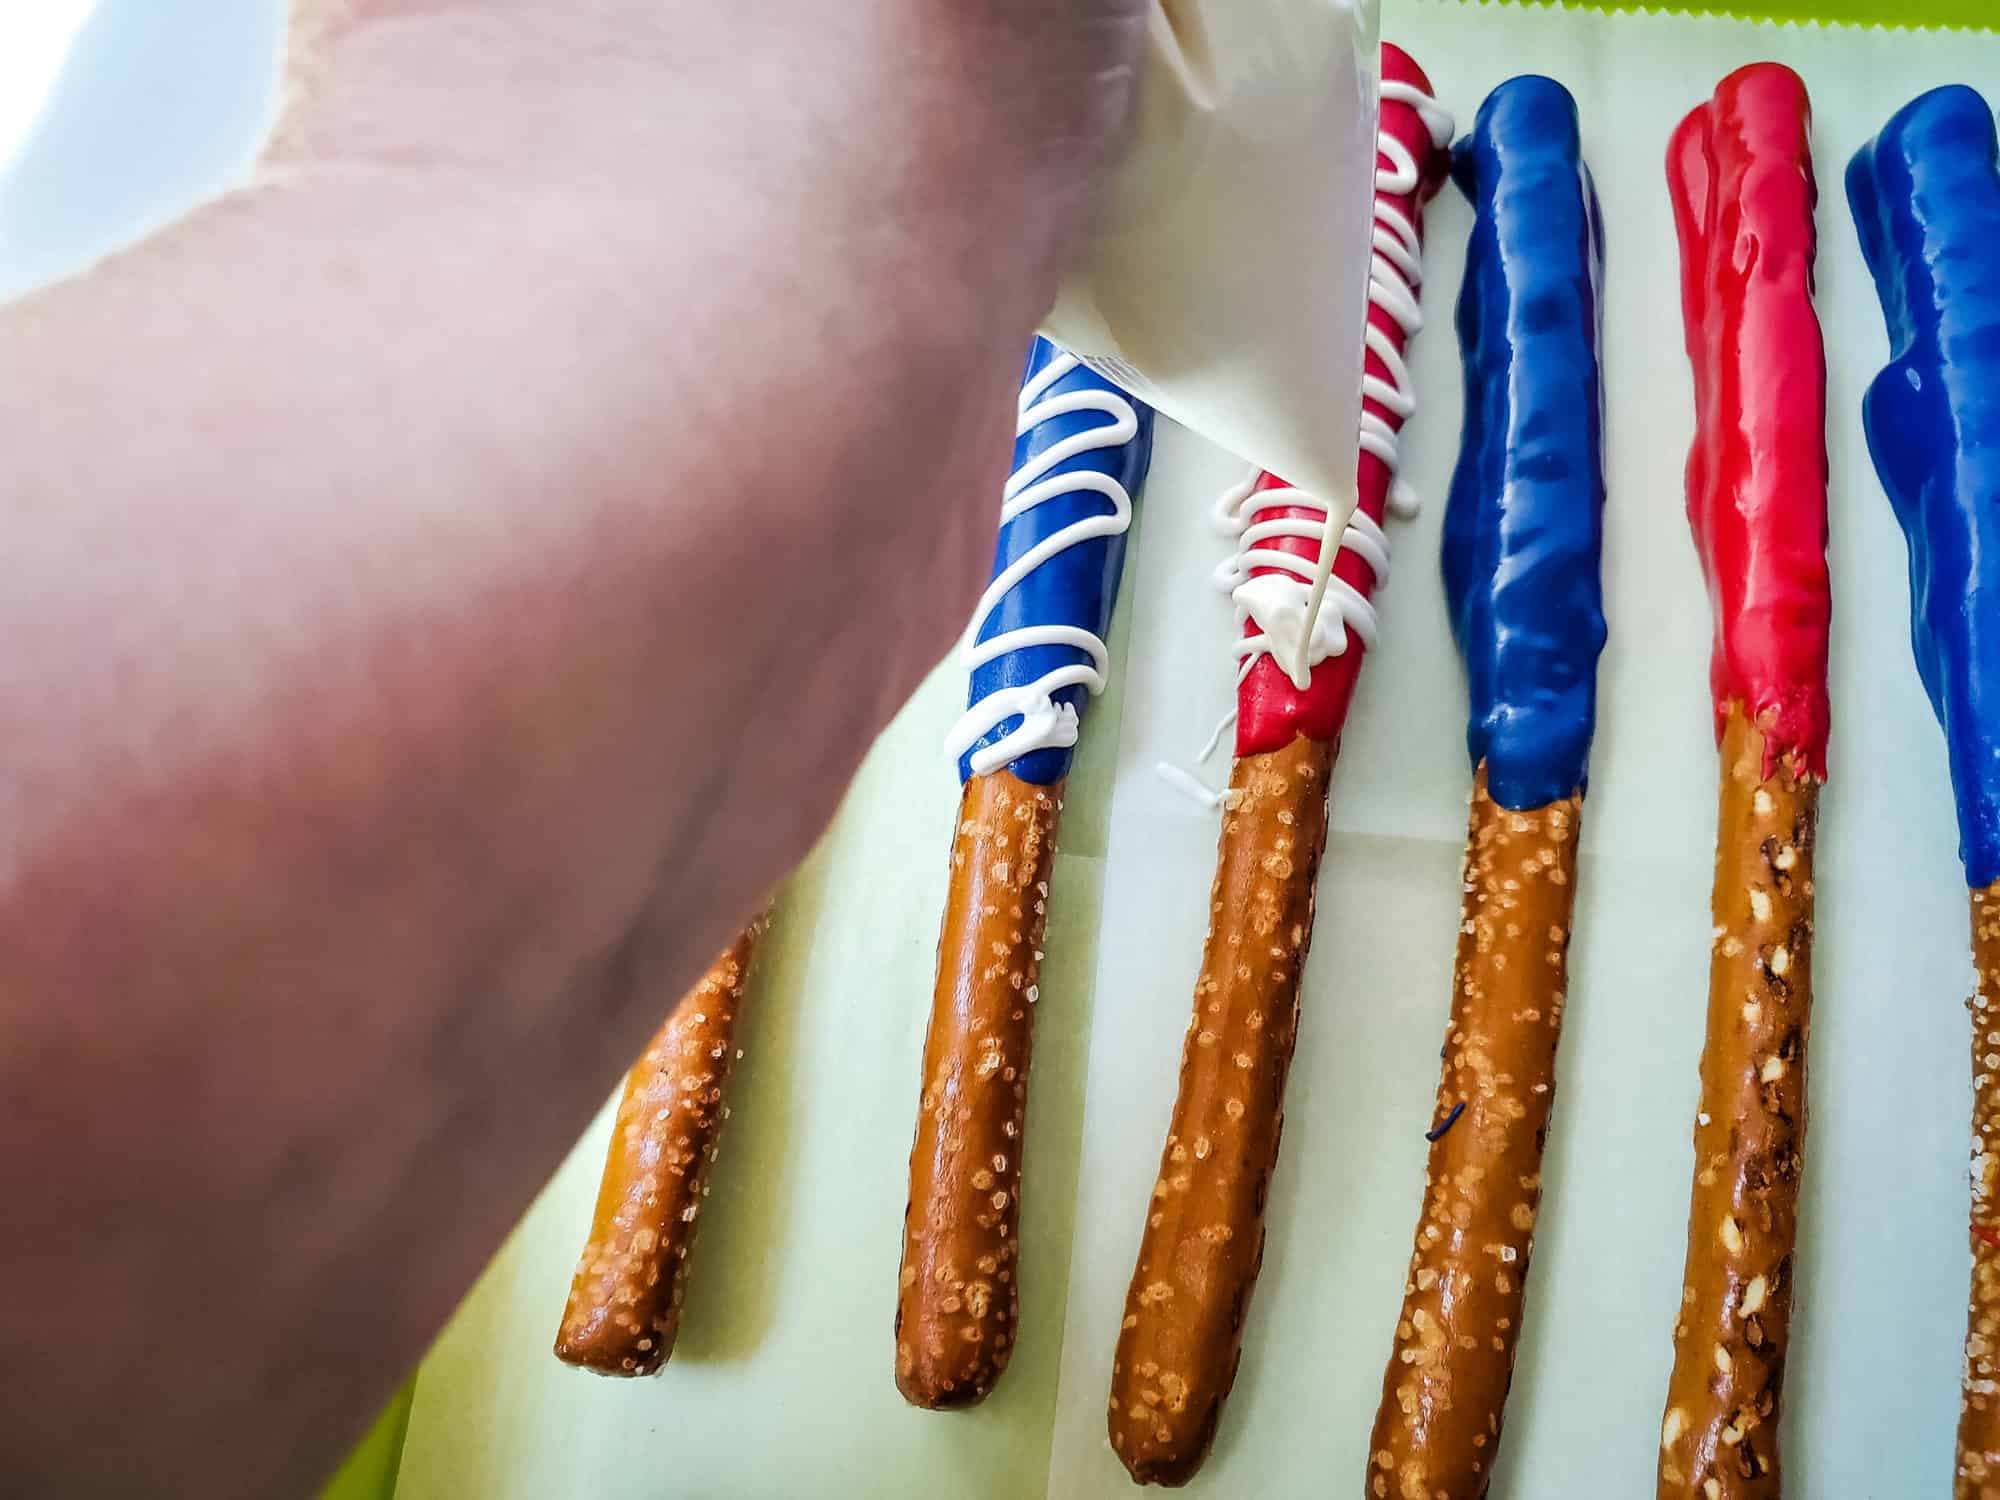 melted white chocolate in a Ziplock piping bag drizzling over coated pretzel rods